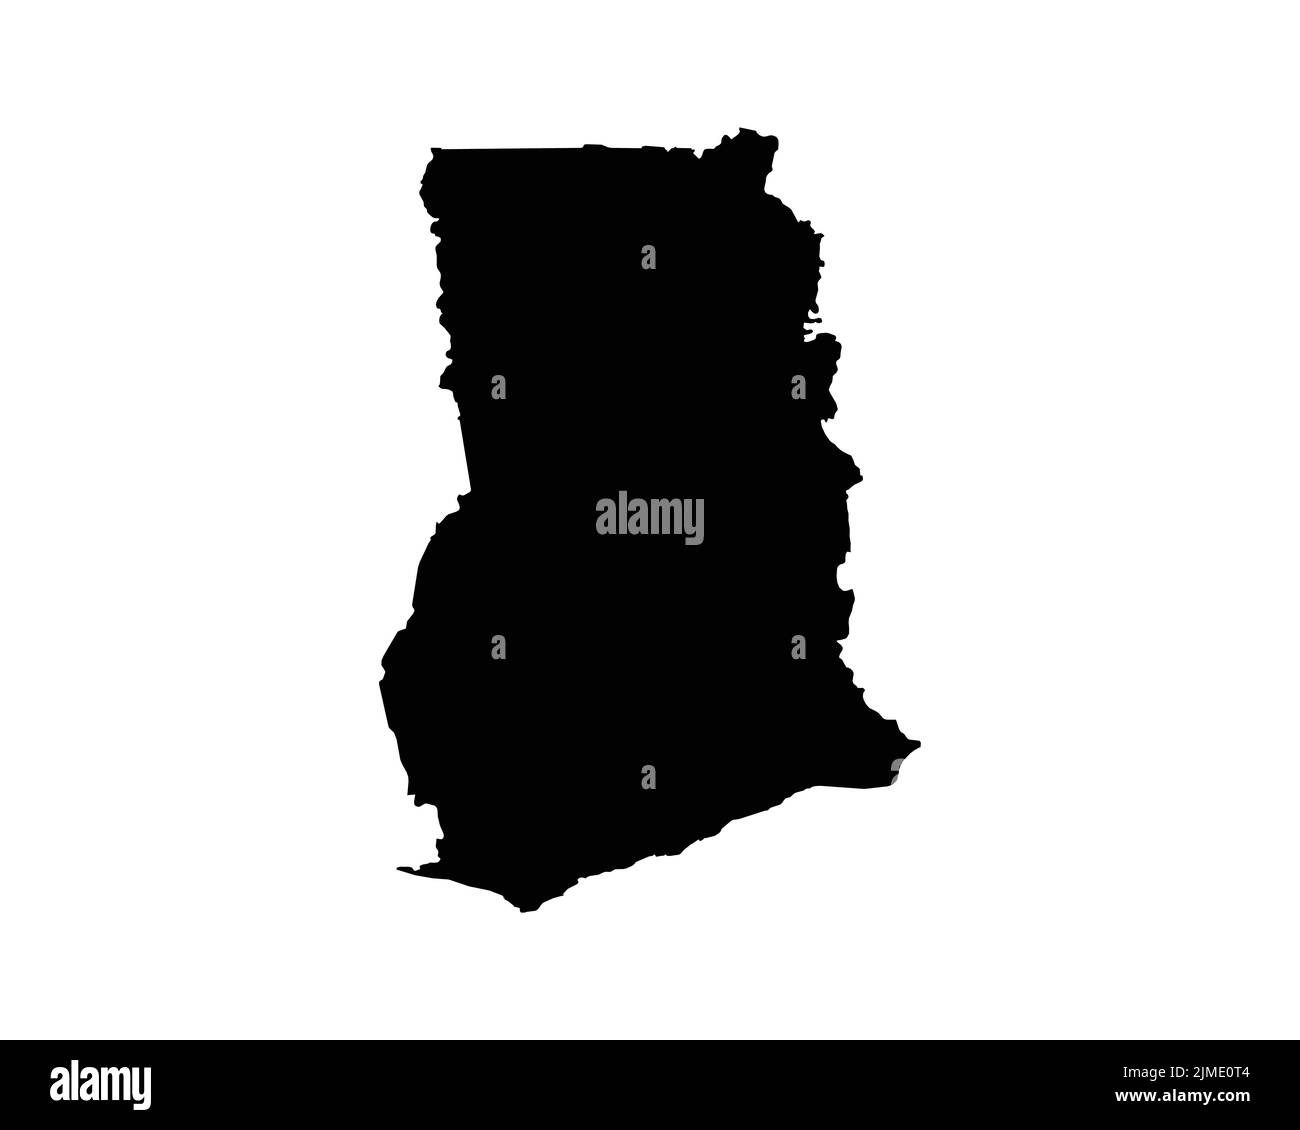 Ghana Map. Ghanaian Country Map. Black and White National Nation Outline Geography Border Boundary Shape Territory Vector Illustration EPS Clipart Stock Vector